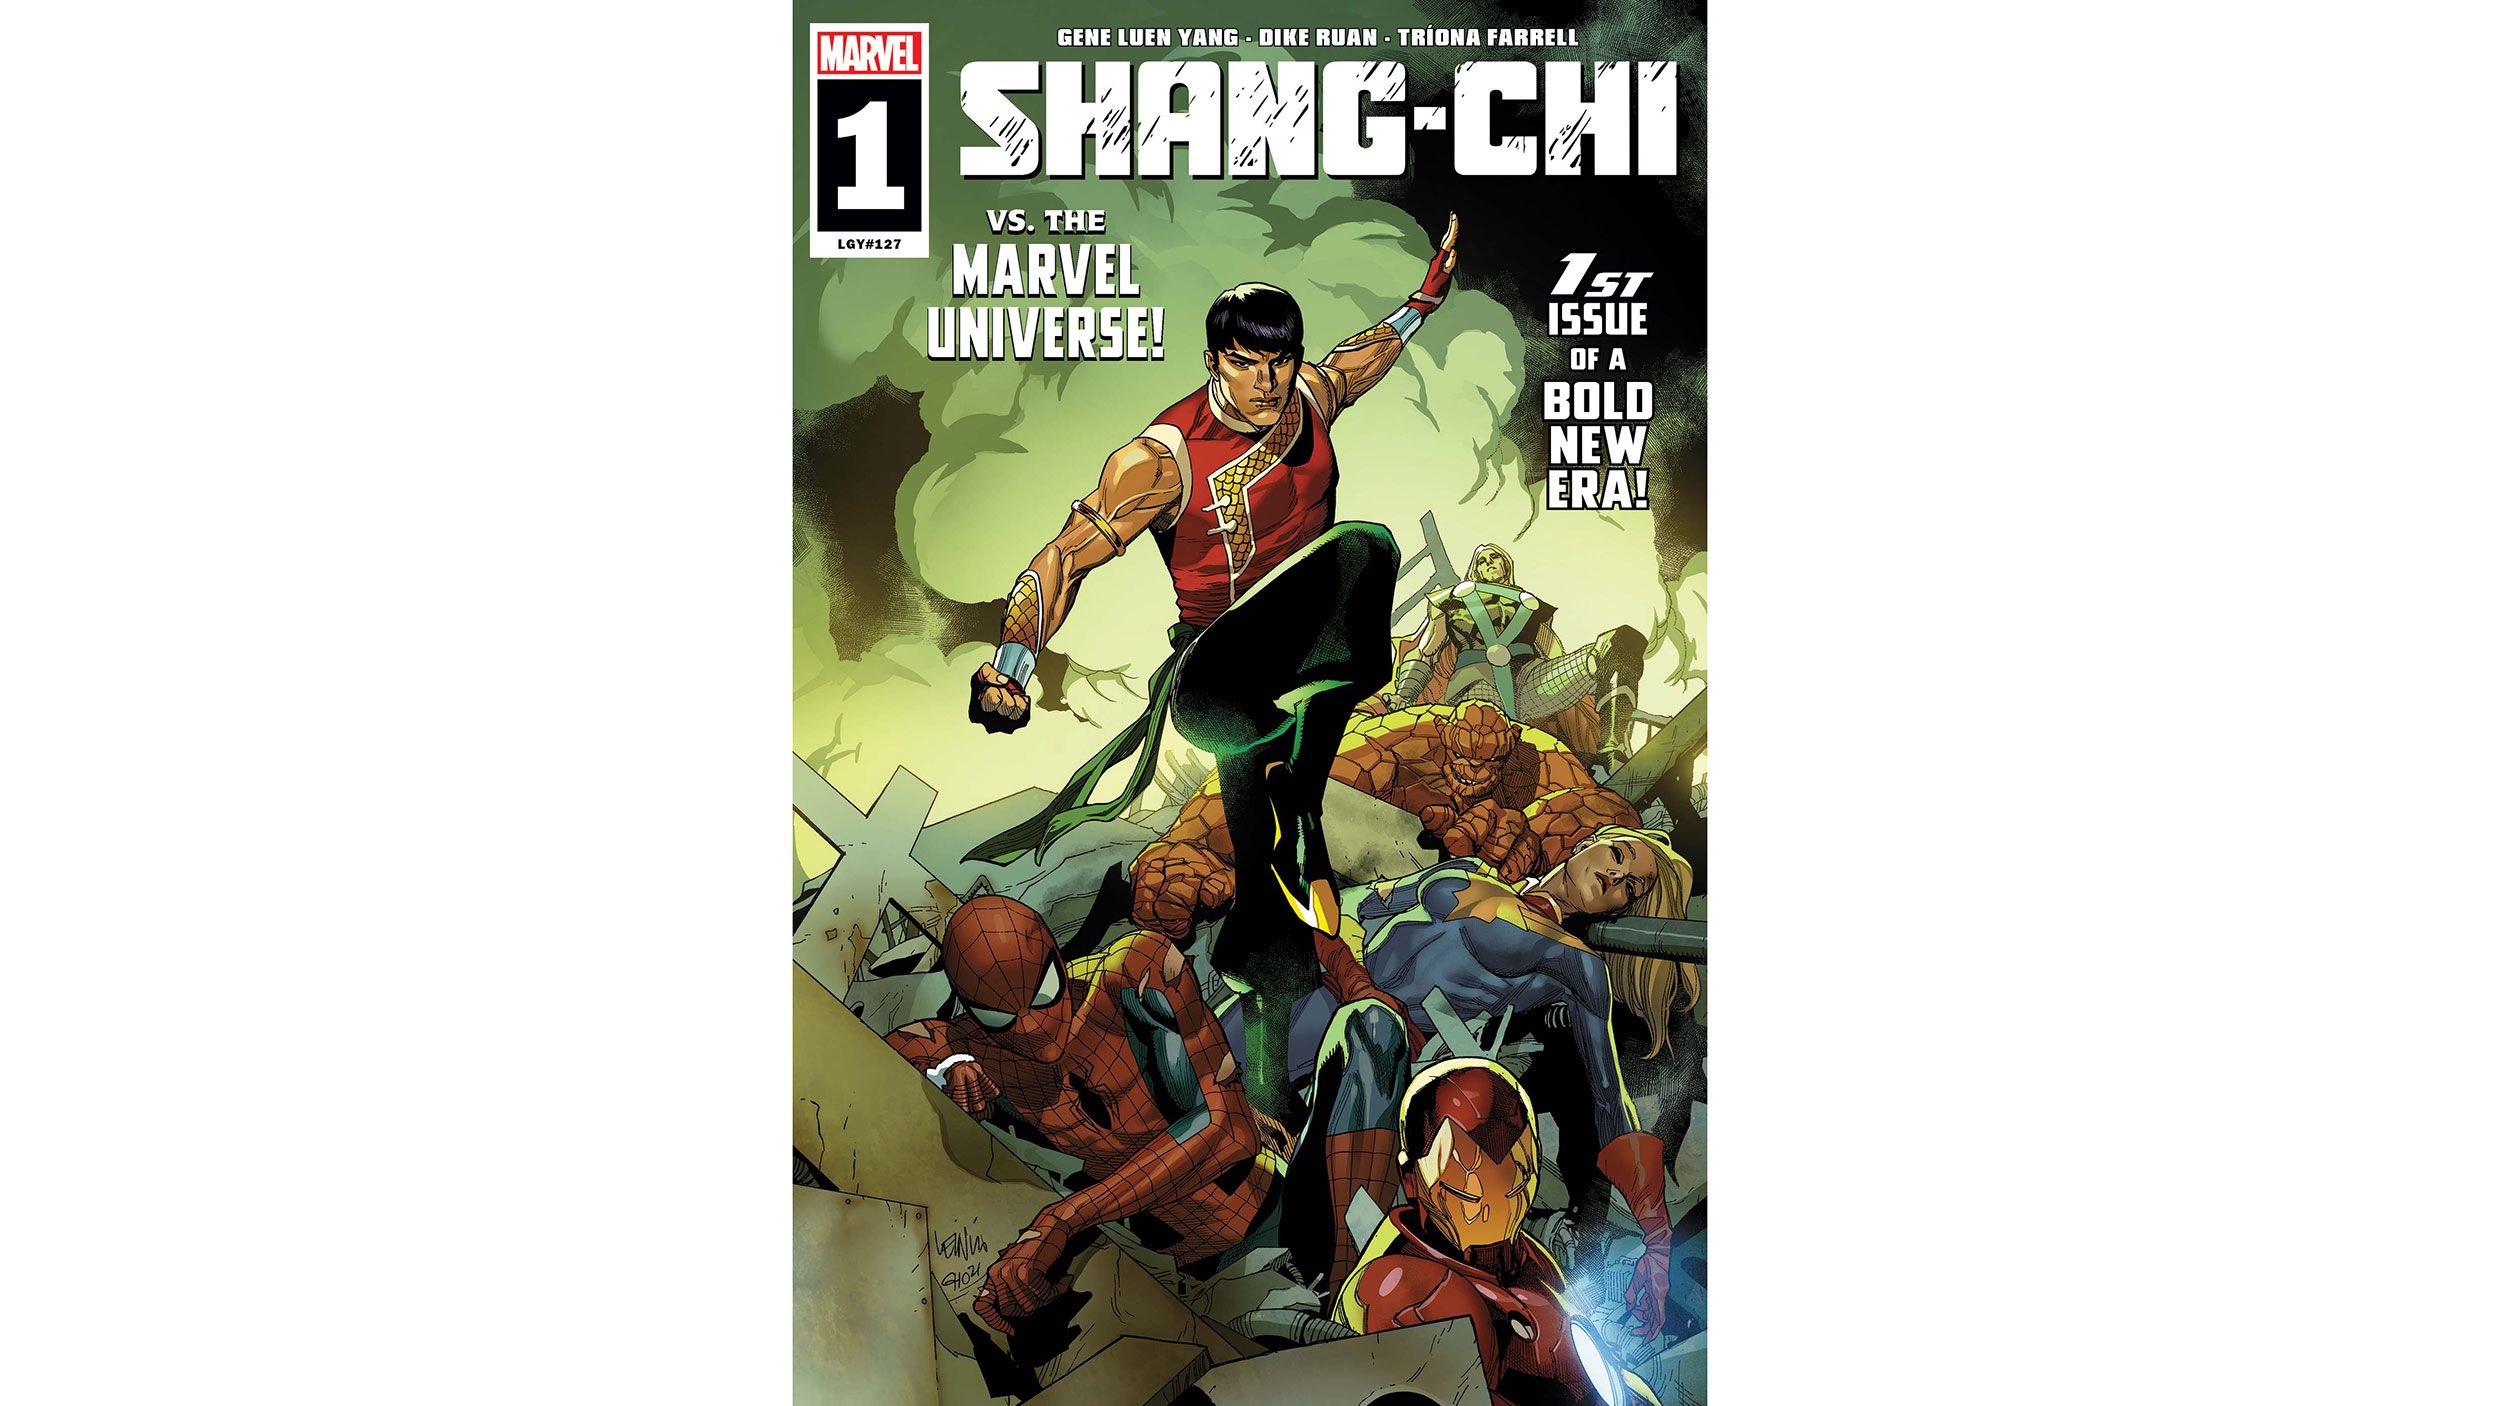 Inside Shang-Chi's evolution from forgotten comic book character